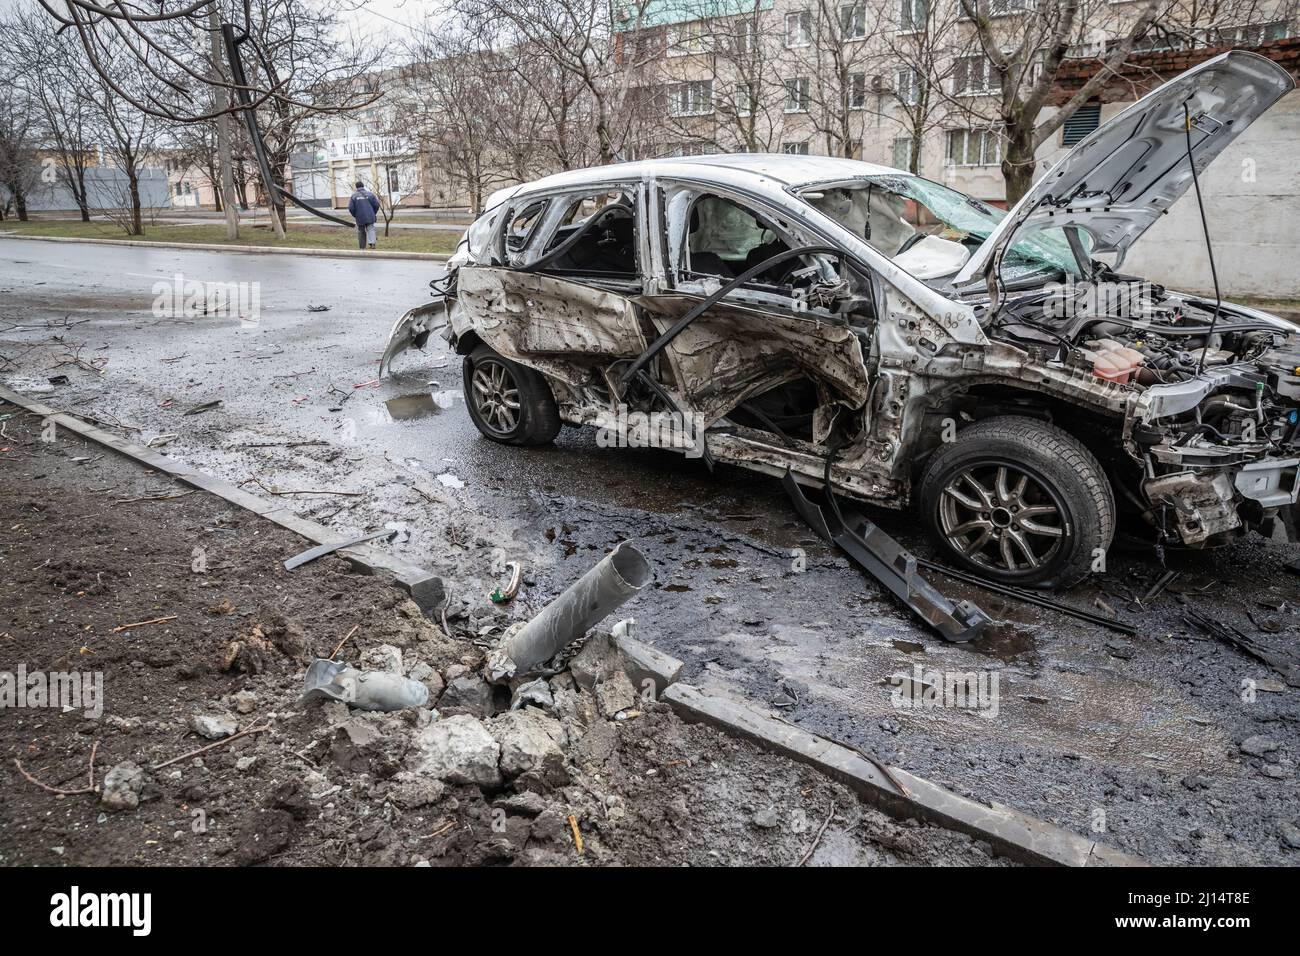 Remains of a Grad missile embedded in the ground and a damaged car parked in a street aftermath of Russian shelling in Mariupol, Ukraine, during the R Stock Photo